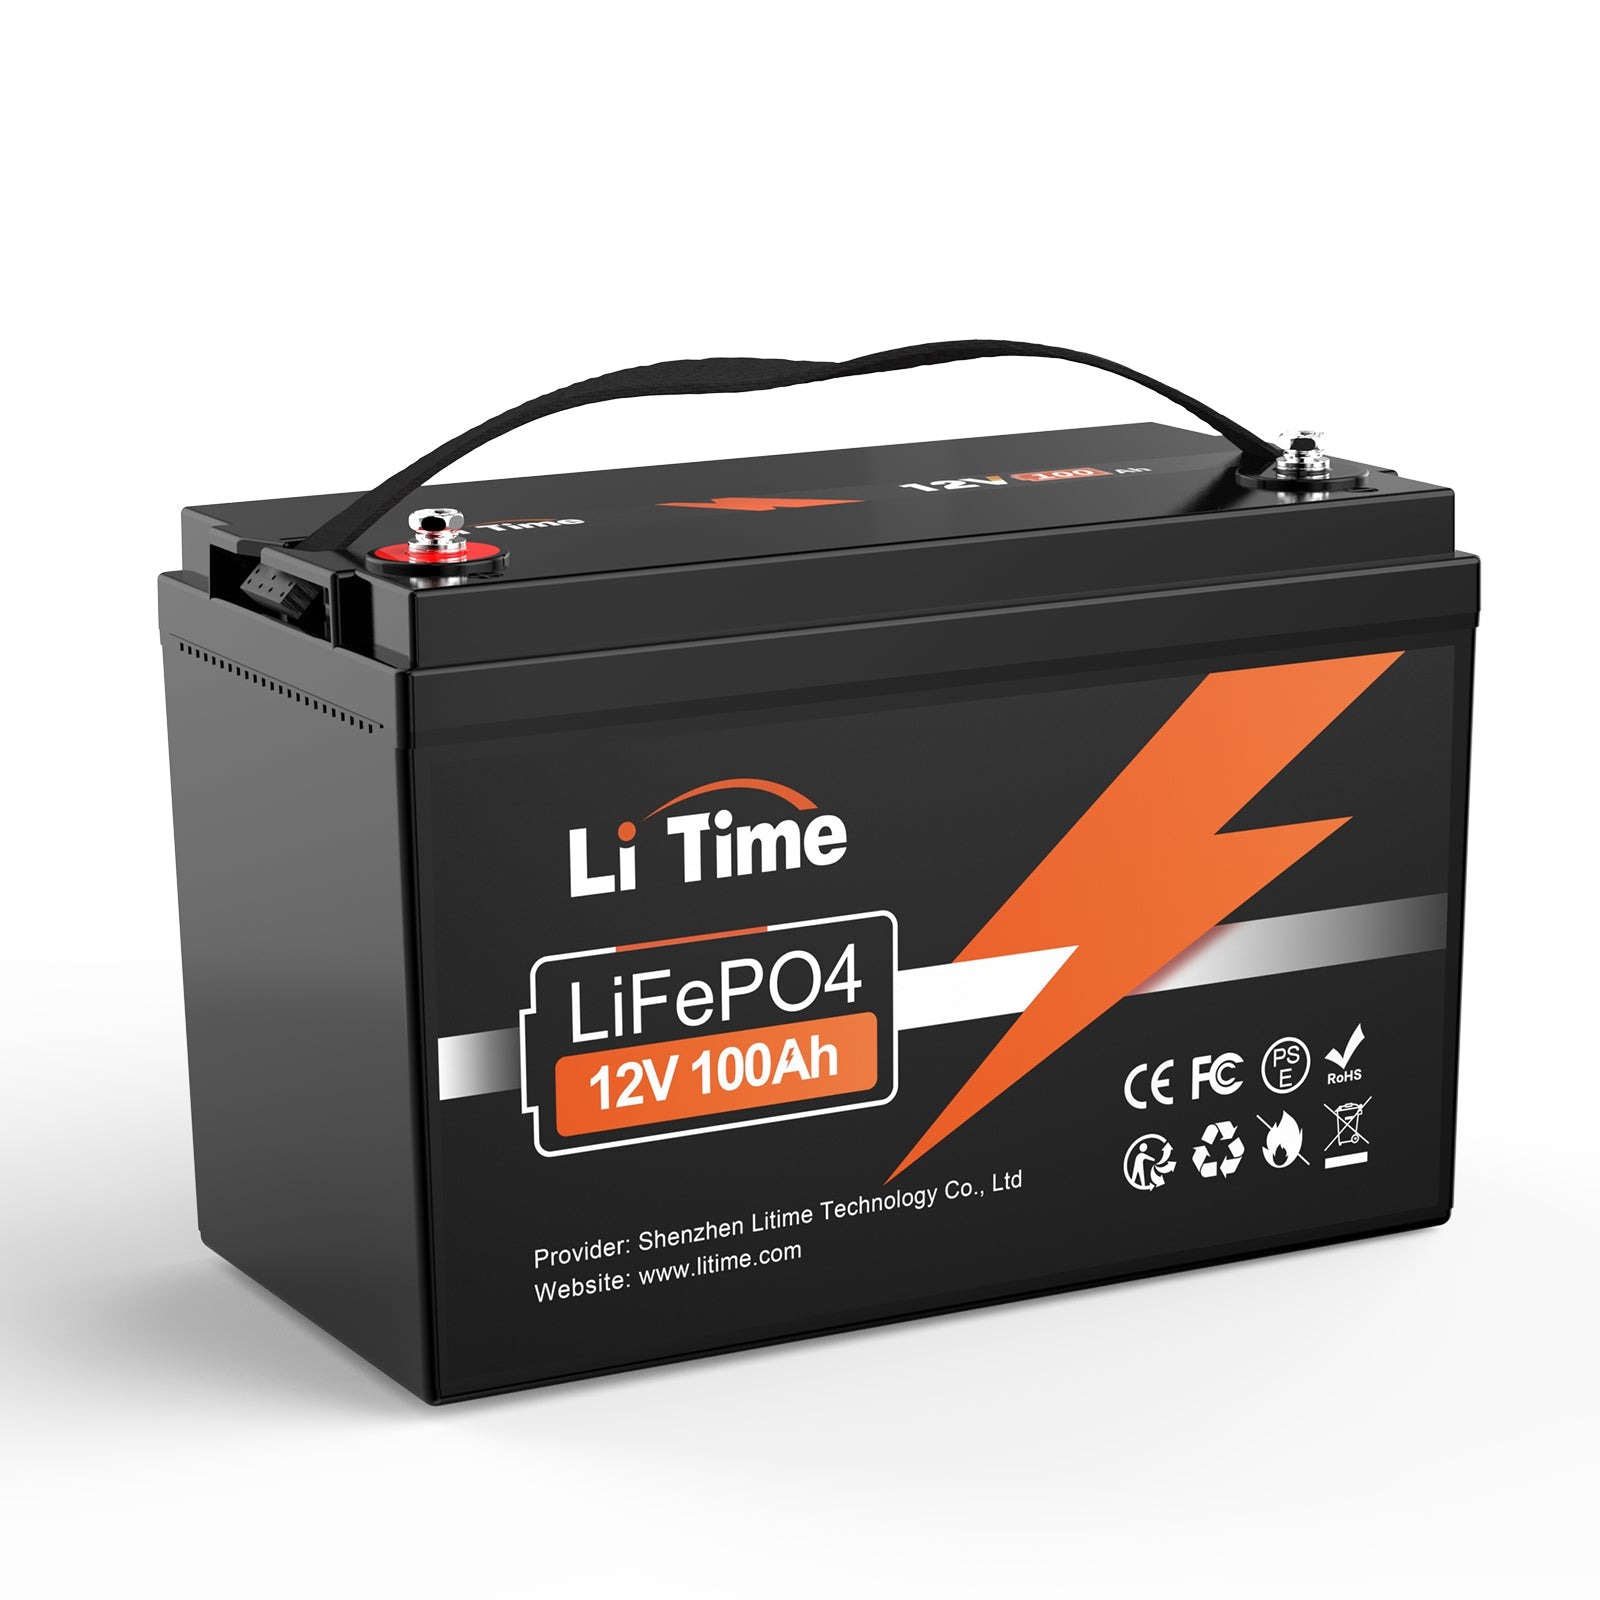 LiTime 「Ampere Time 」12V 100Ah LiFePO4 リン酸鉄リチウムイオンバッテリー 内蔵100A BMS https://jp.litime.com/products/12v100ah